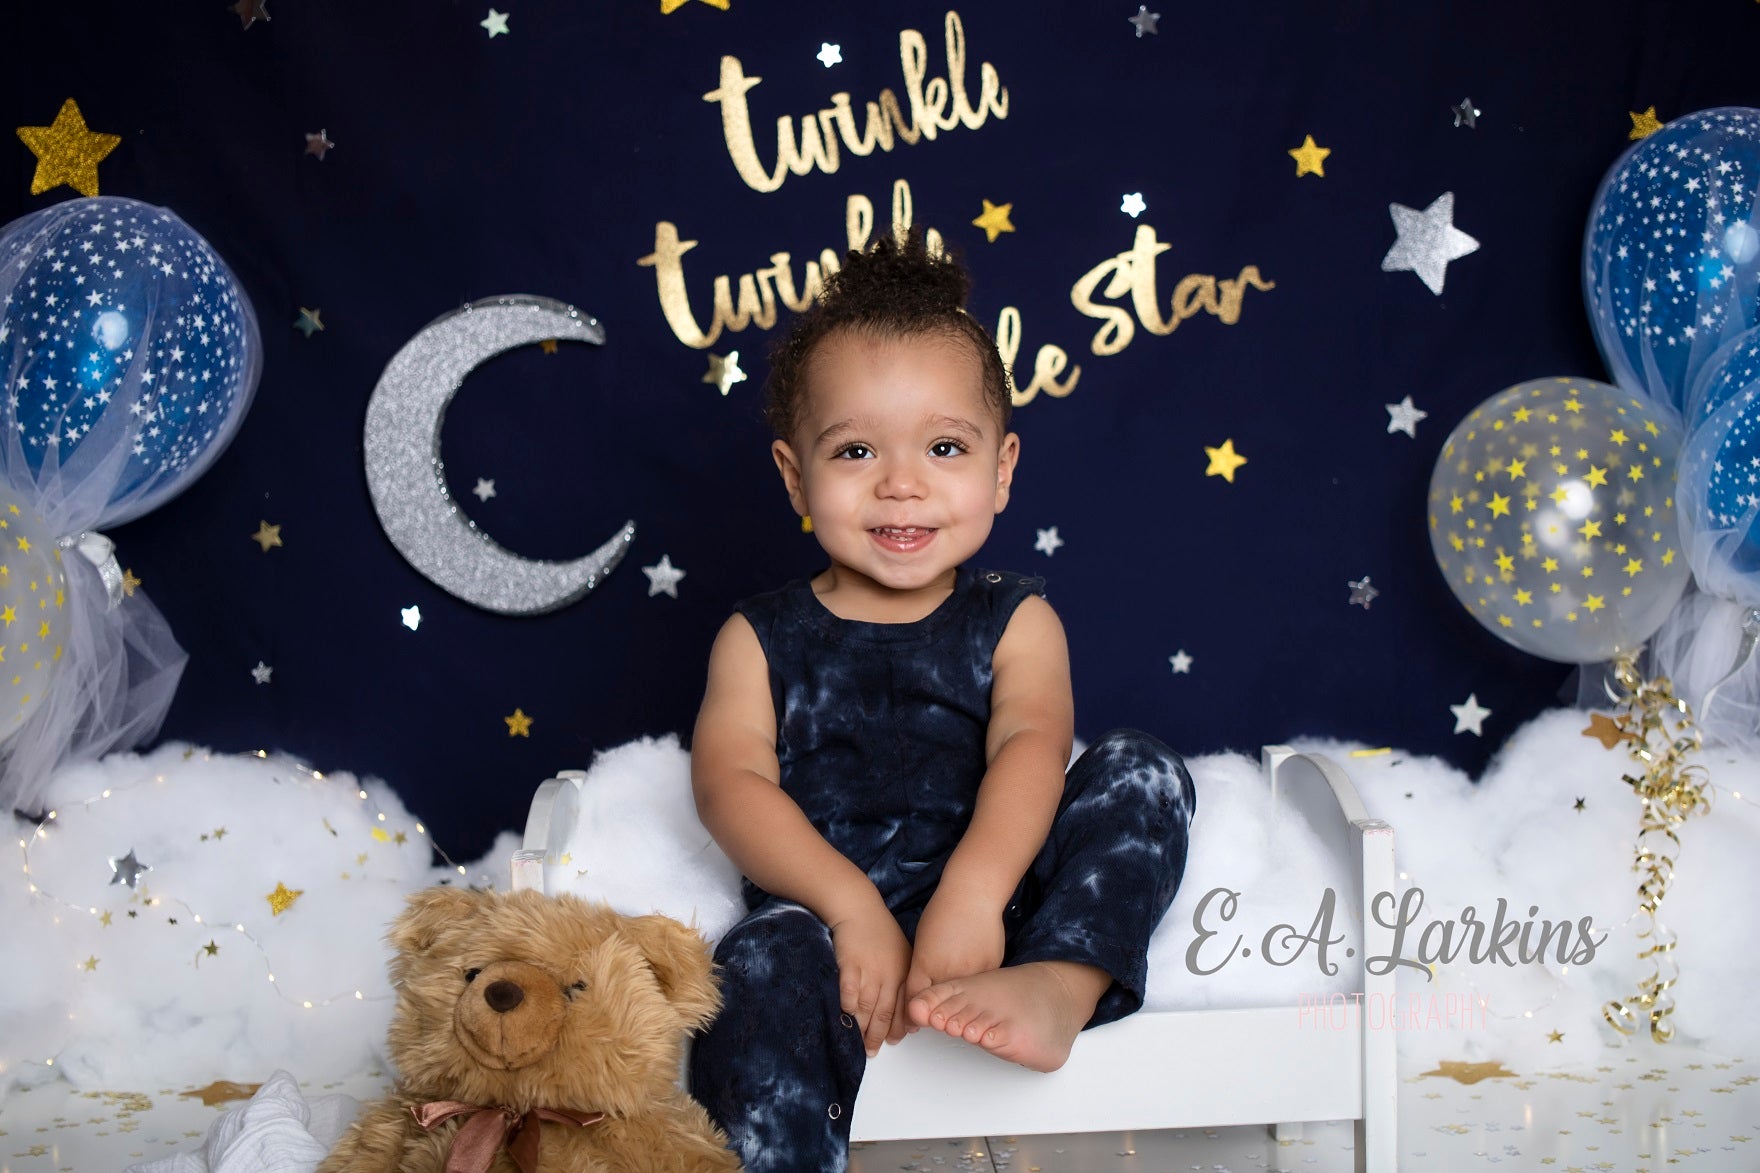 Kate  Twinkle Stars with Balloons Backdrop for Photography Designed By Erin Larkins